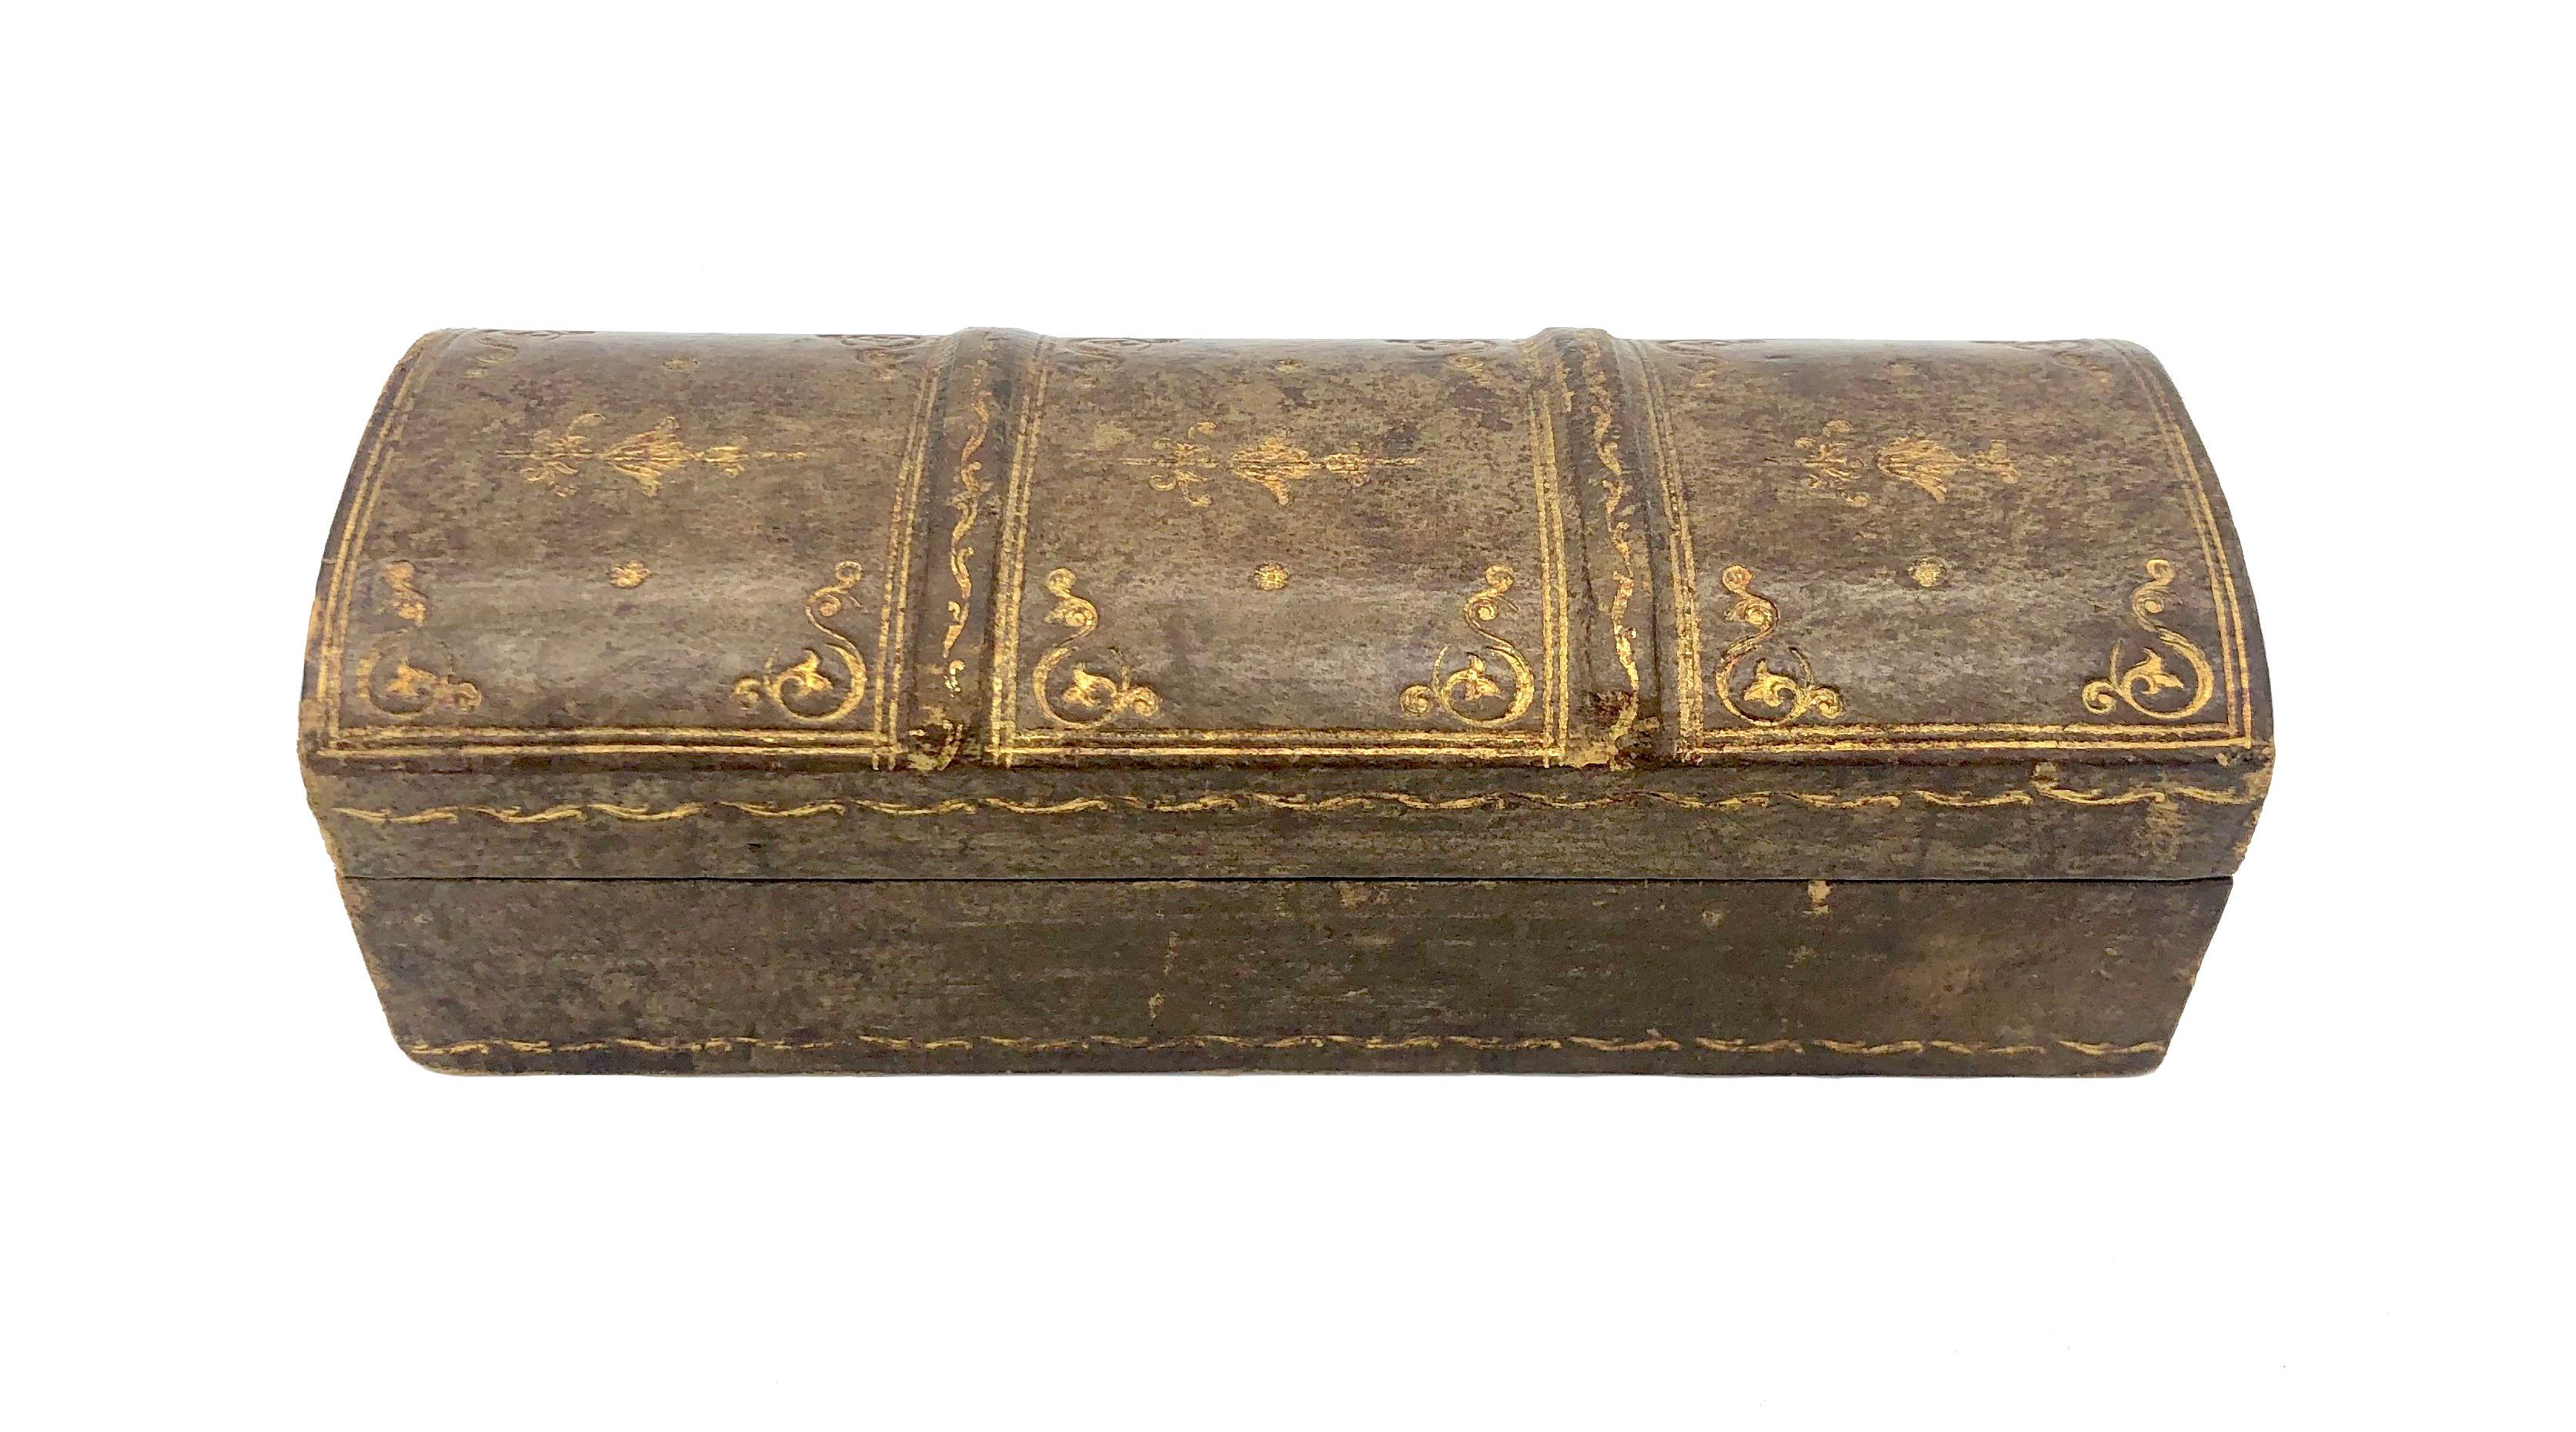 This elegant box was handcrafted in the last 15 years of the ninetennth century. It is made out of leather, wood and fabric. The four sloping compatrments suggest that this box was used for stamps. This lovely object with it's fine patina resembles